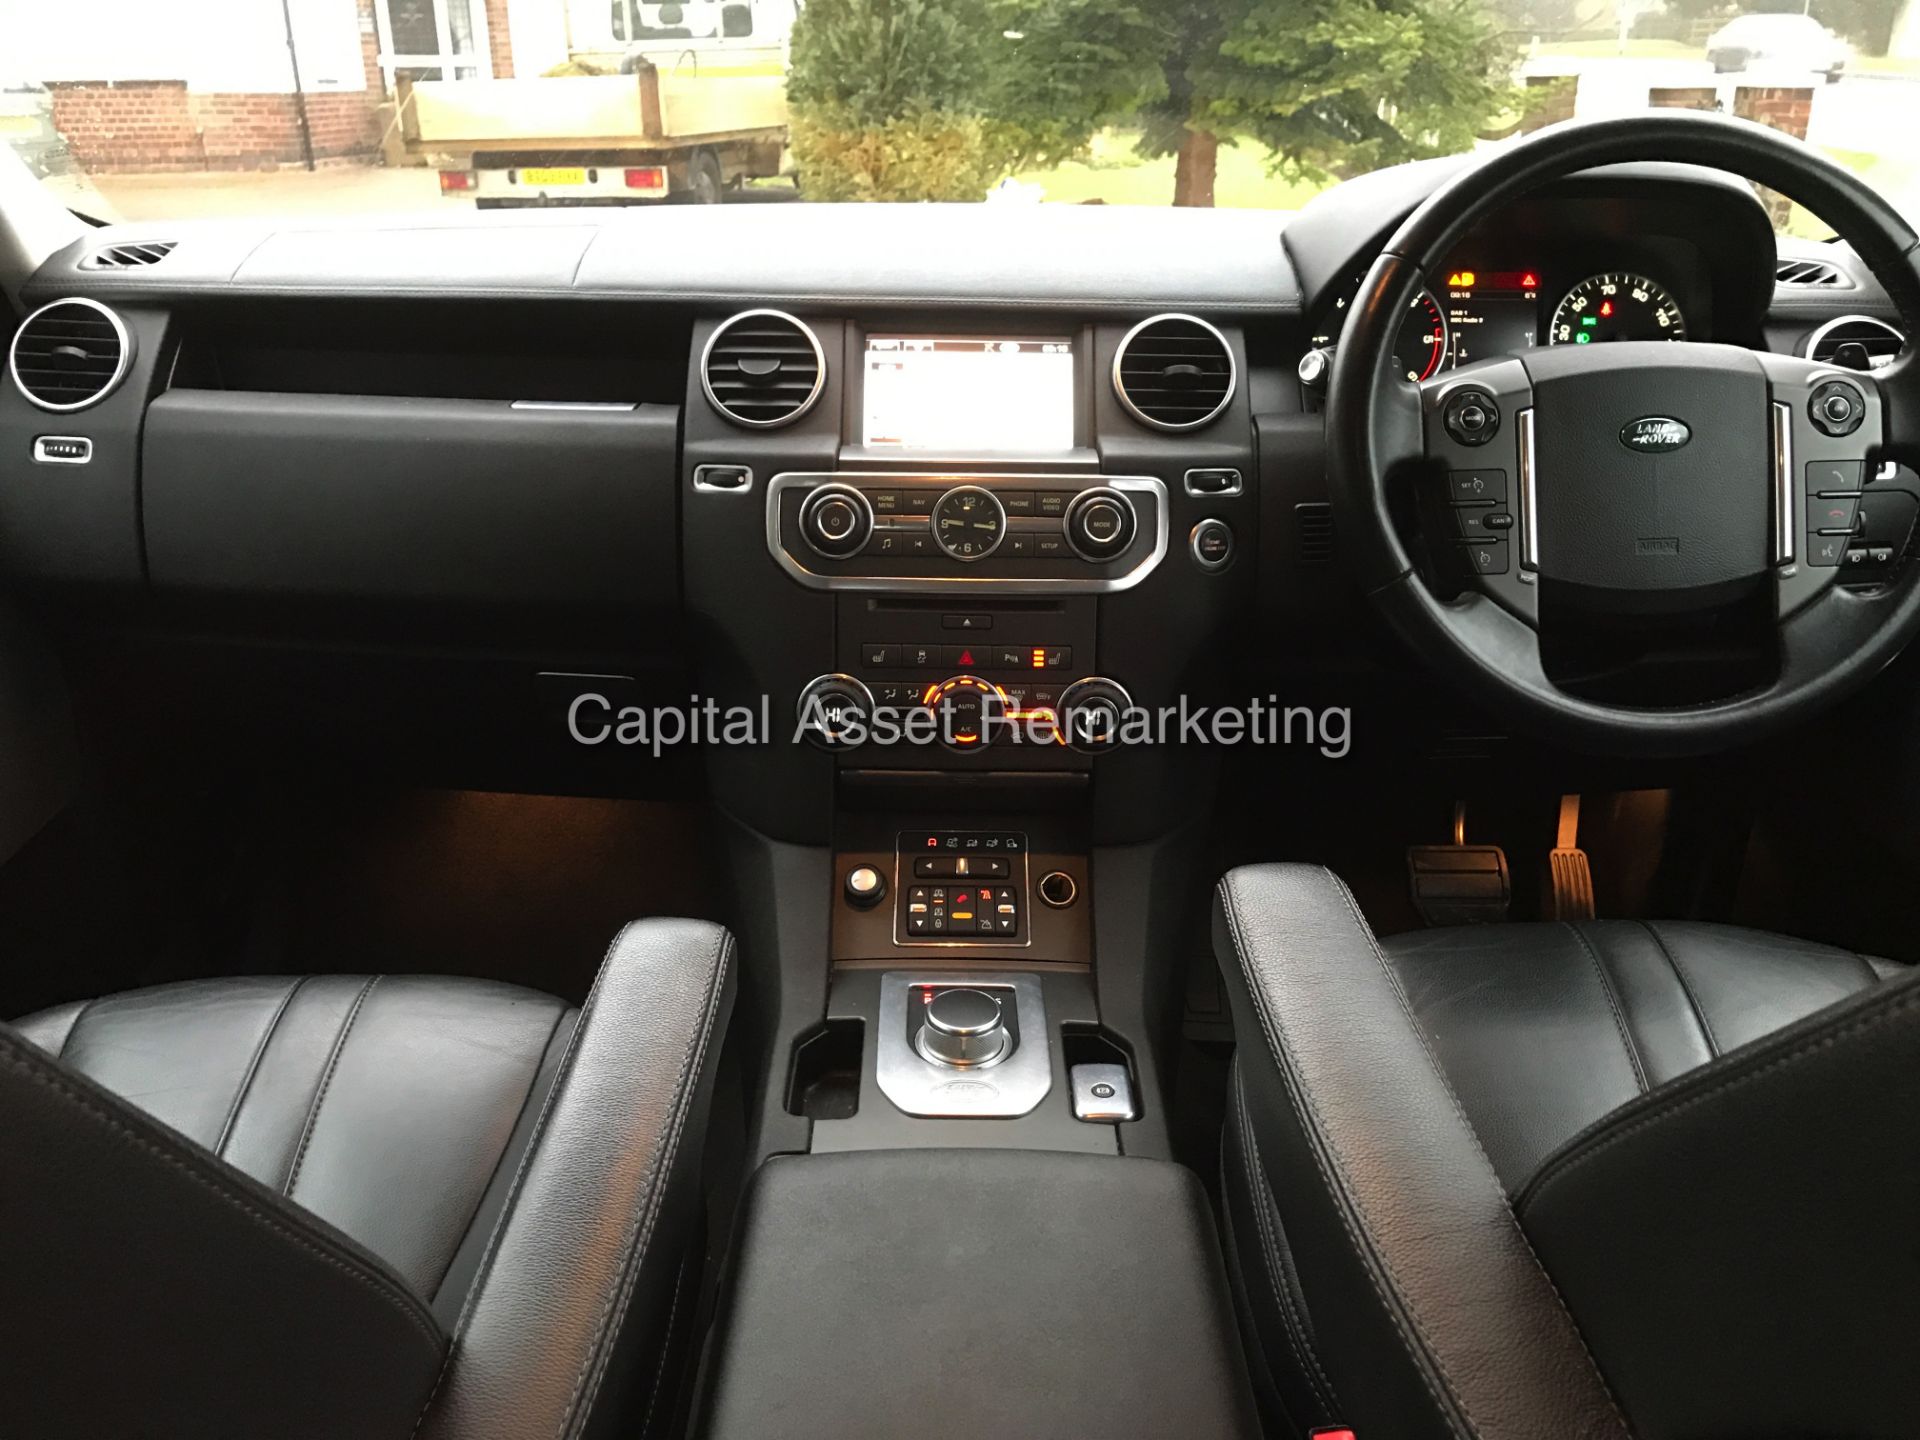 LANDROVER DISCOVERY 3.0 "SDV6 - XS" AUTO (2013 MODEL) 1 OWNER - LOW MILES / FSH - NAV - LEATHER - Image 11 of 21